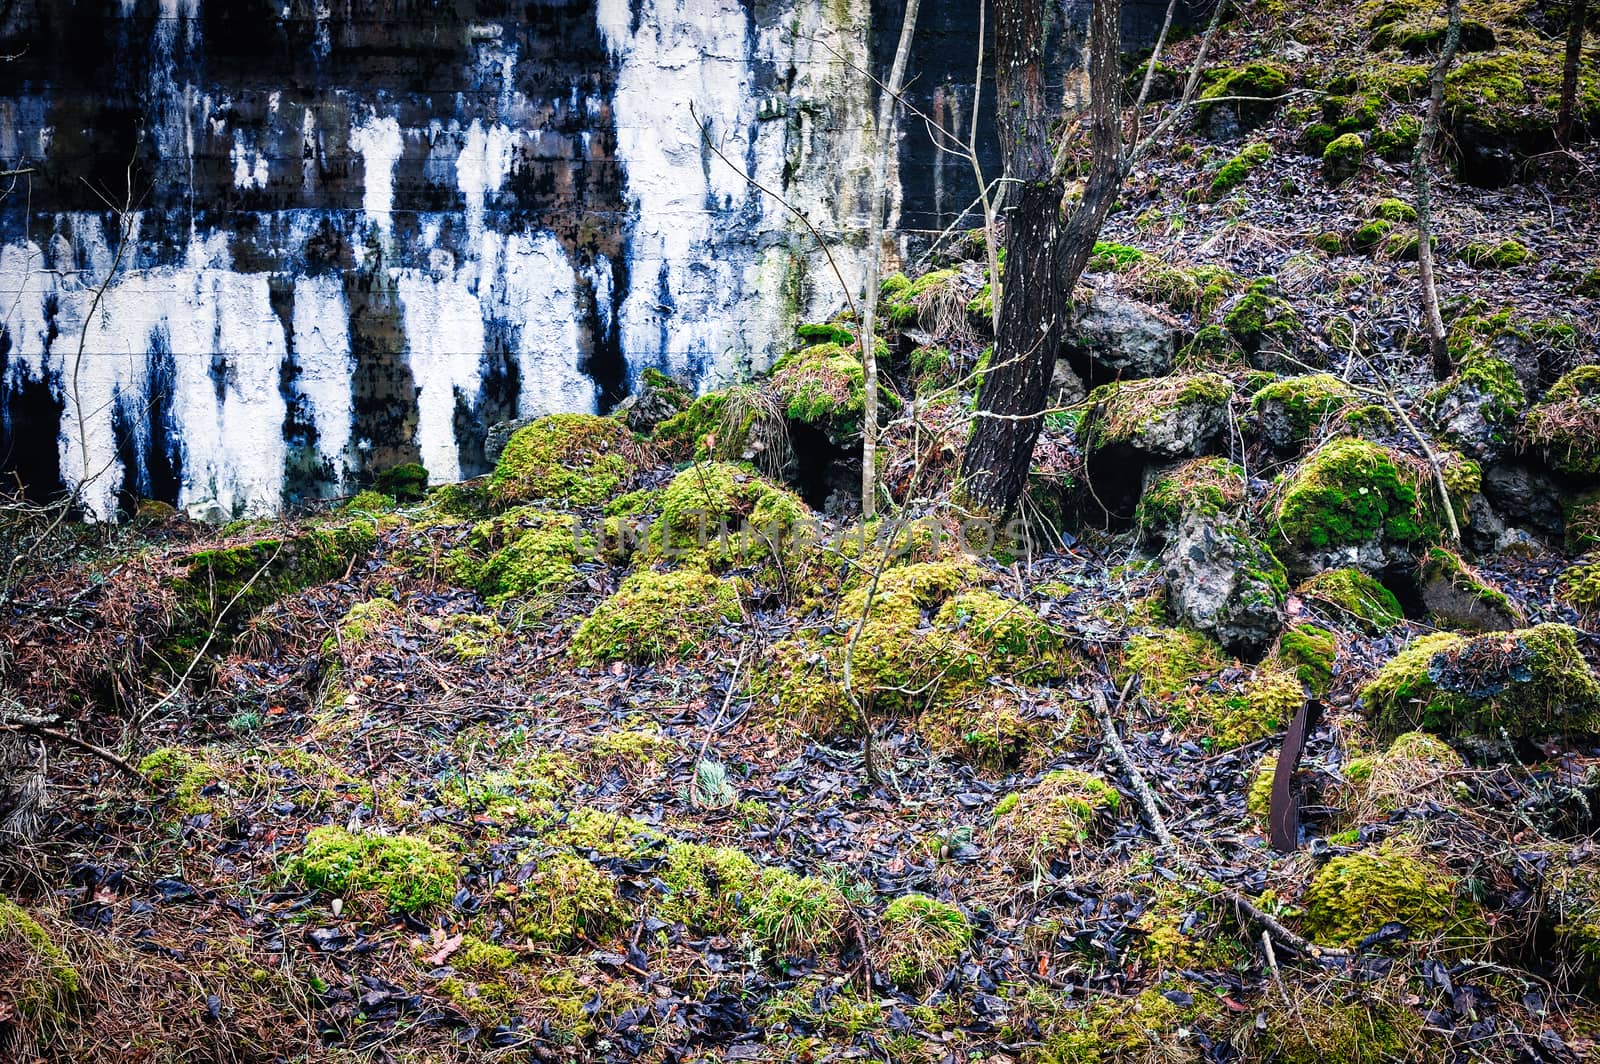 Wall ruins and moss on stones in pine tree forest